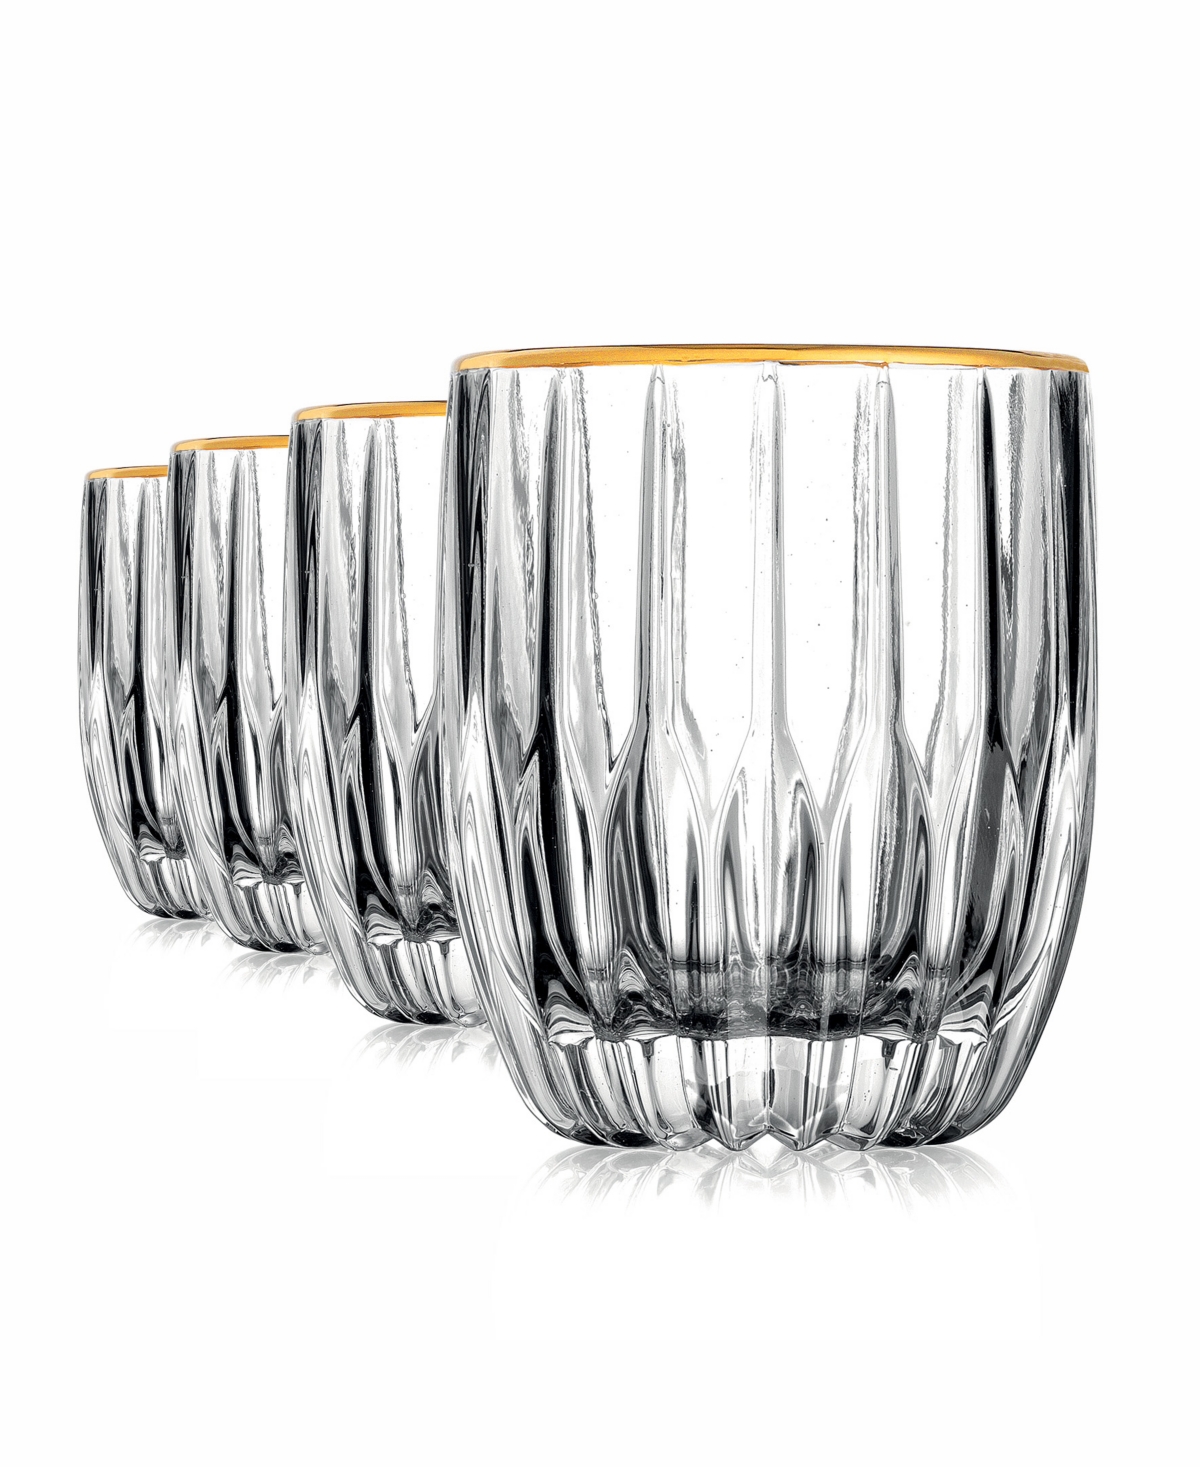 Godinger Pleat Gold Rim Double Old-fashioned Glasses, Set Of 4 In Clear